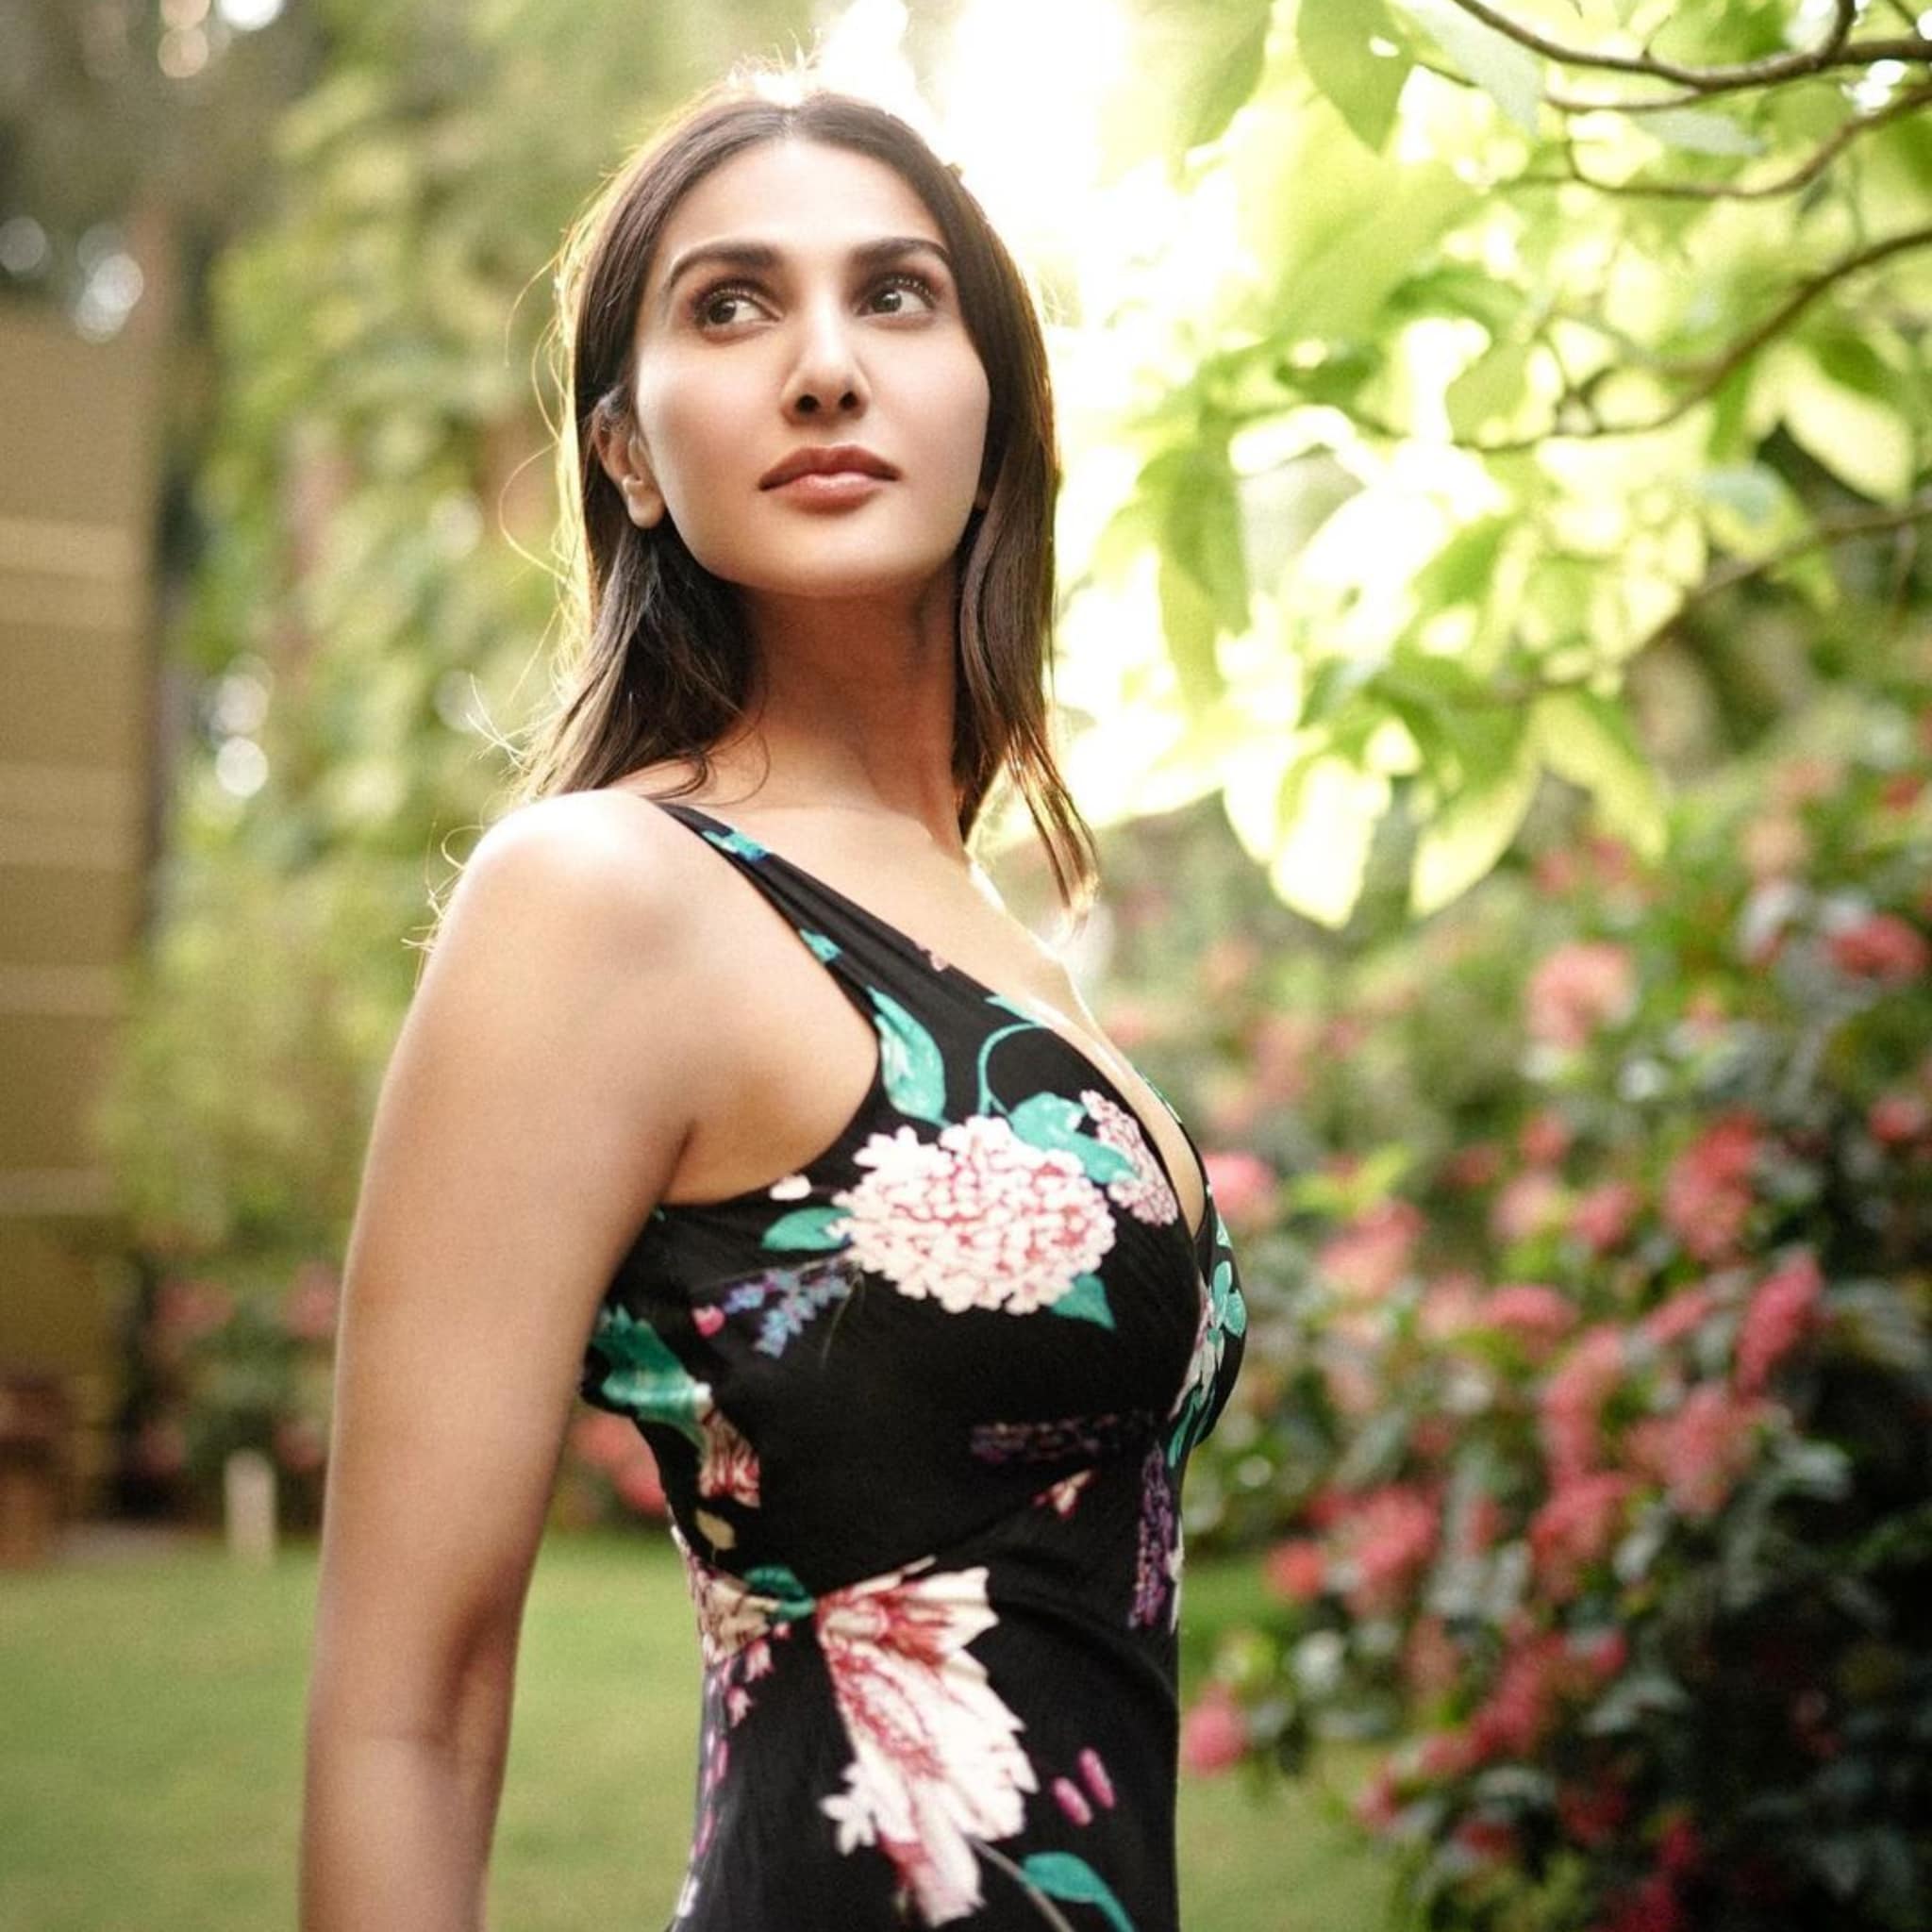 Ponrstar - Vaani Kapoor To Play a Porn Star Look-Alike In Her Upcoming Movie? Here's  What We Know - News18